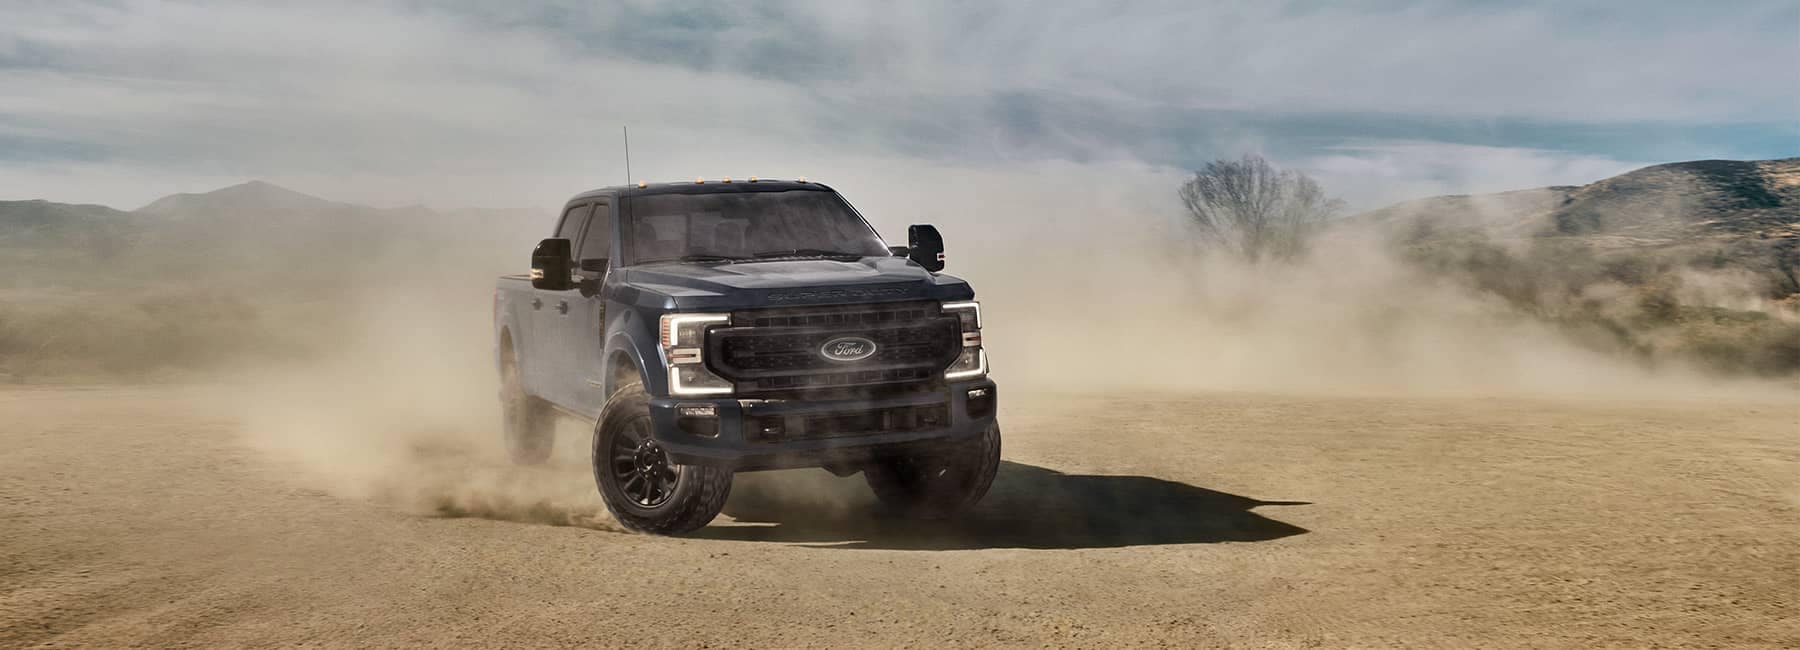 2022 Ford Super Duty on a sandy road